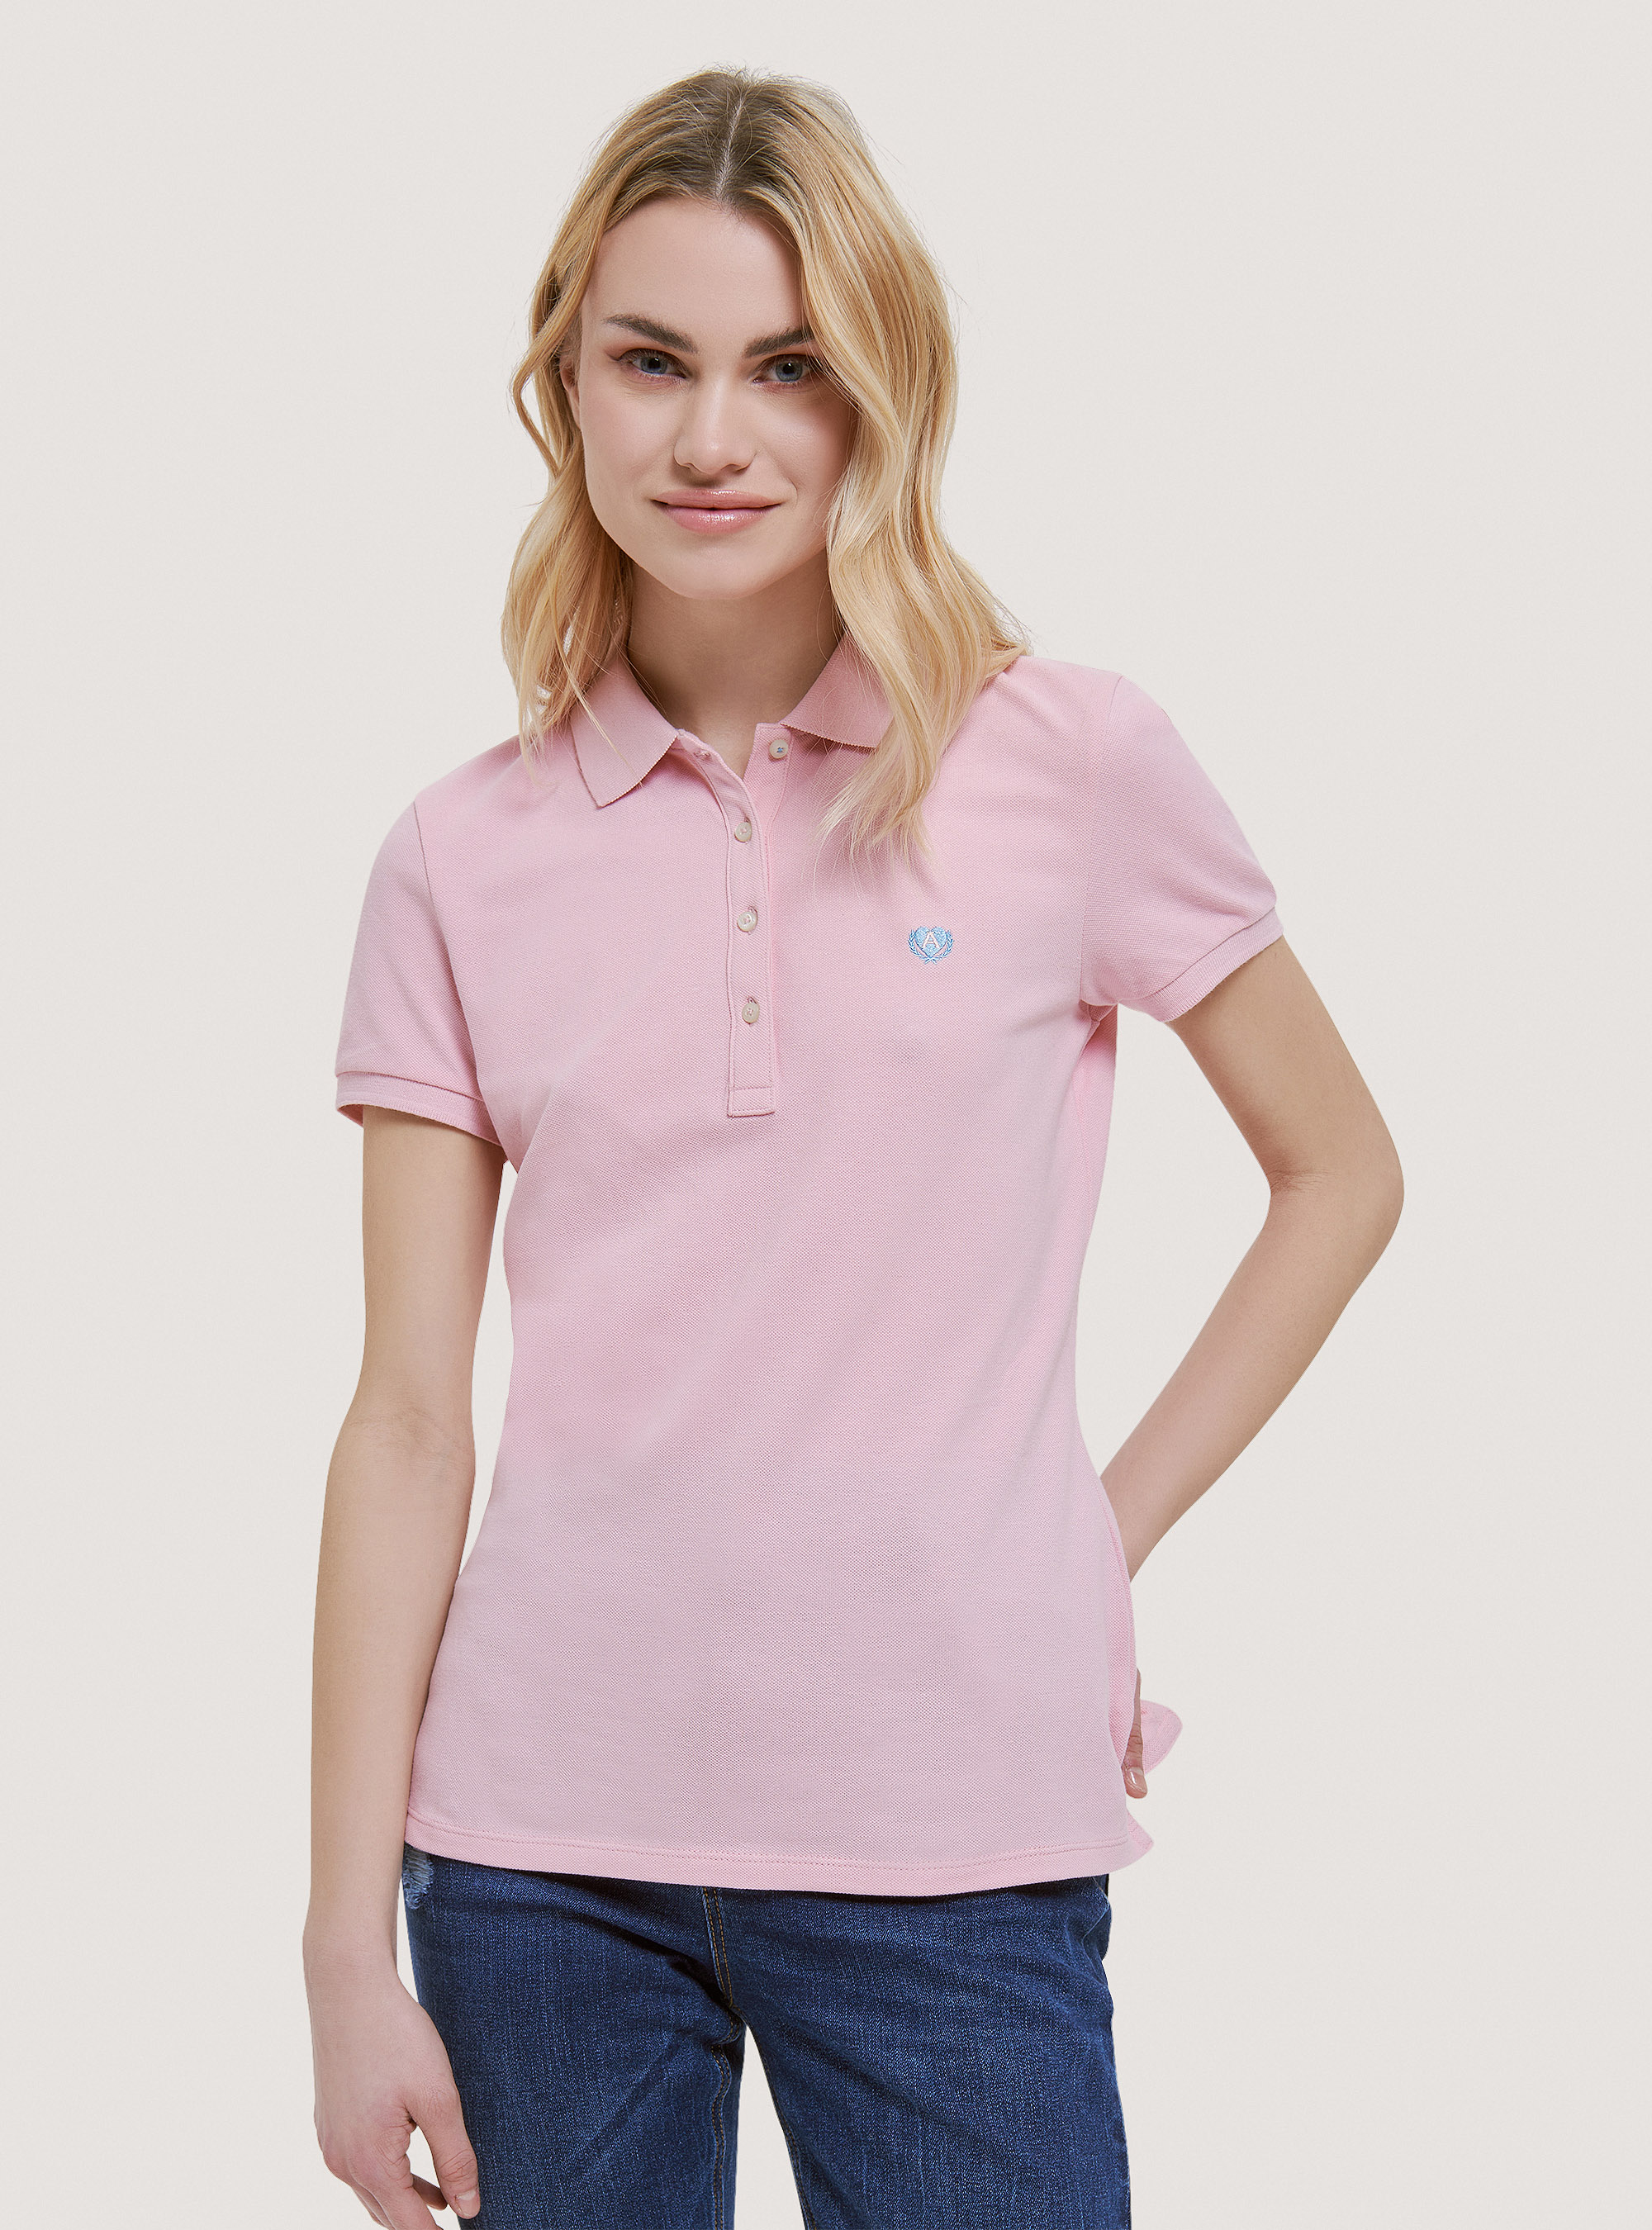 Embroidered Cotton Pique Polo - Ready-to-Wear 1ABY0C